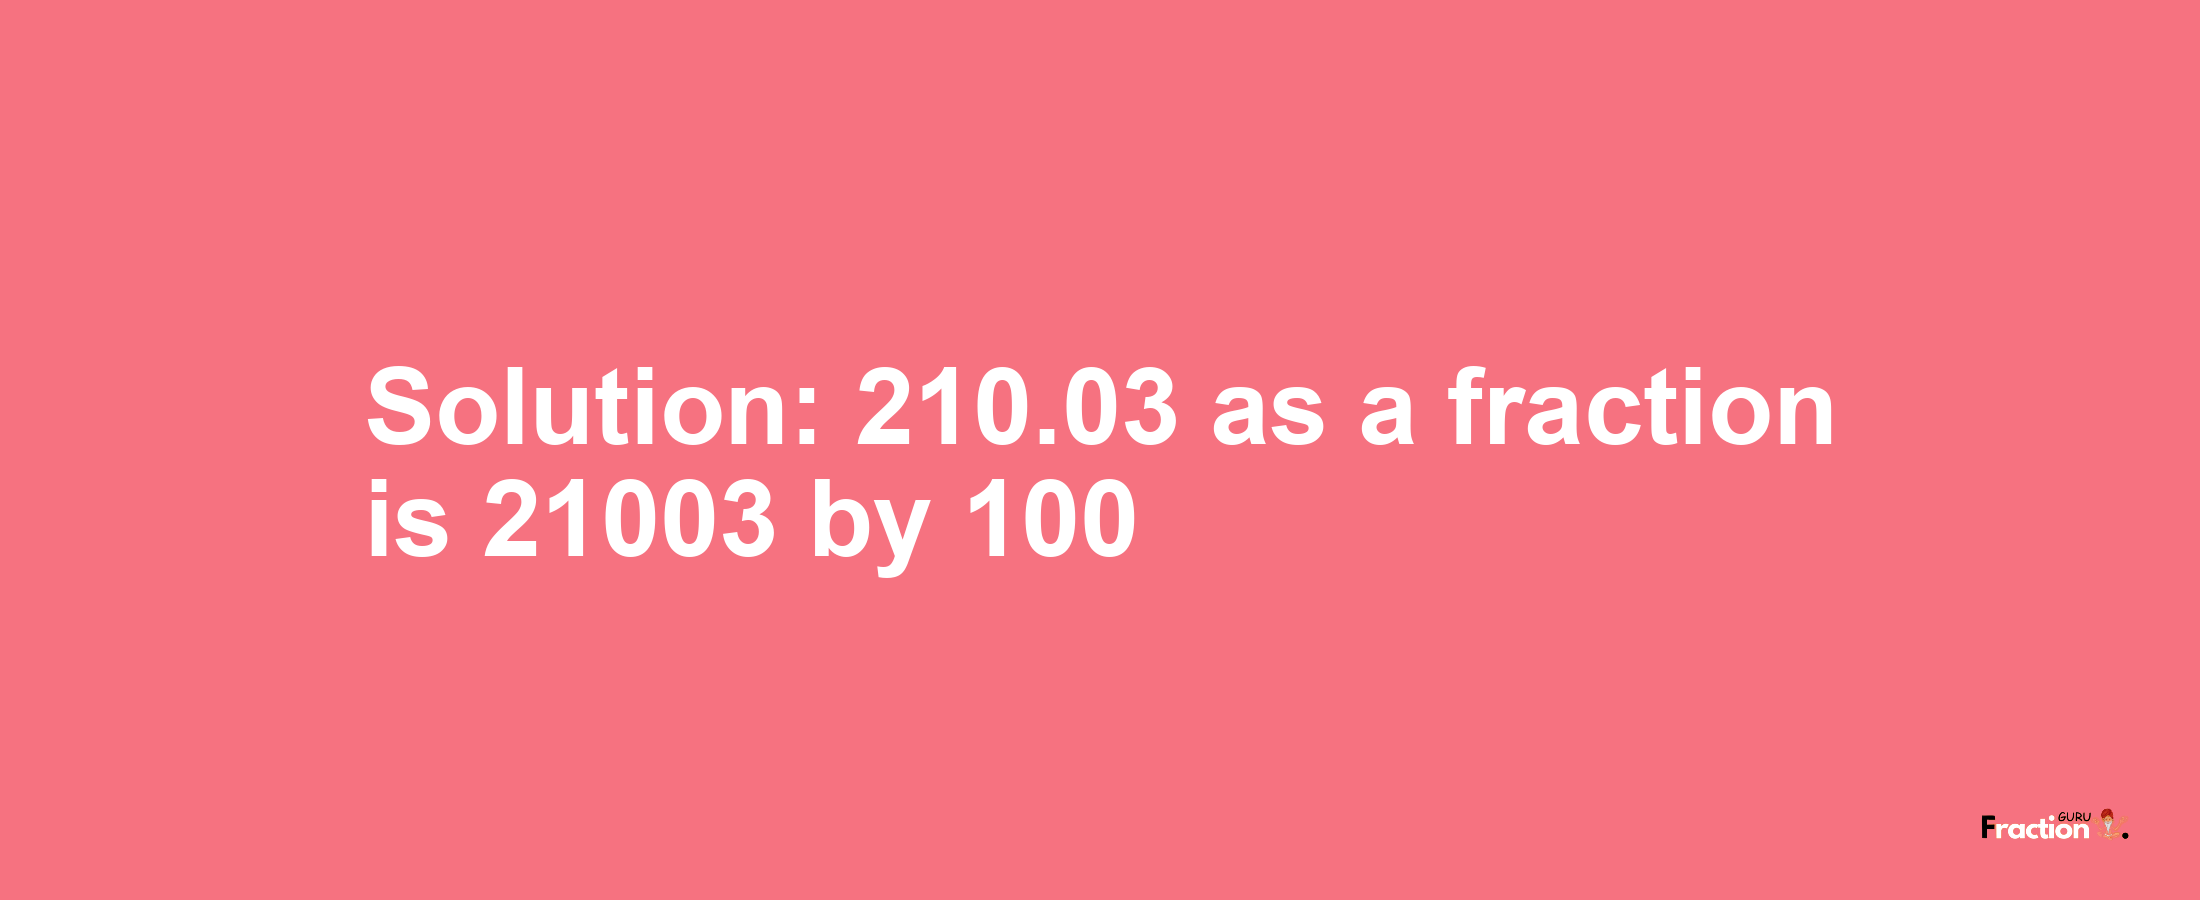 Solution:210.03 as a fraction is 21003/100